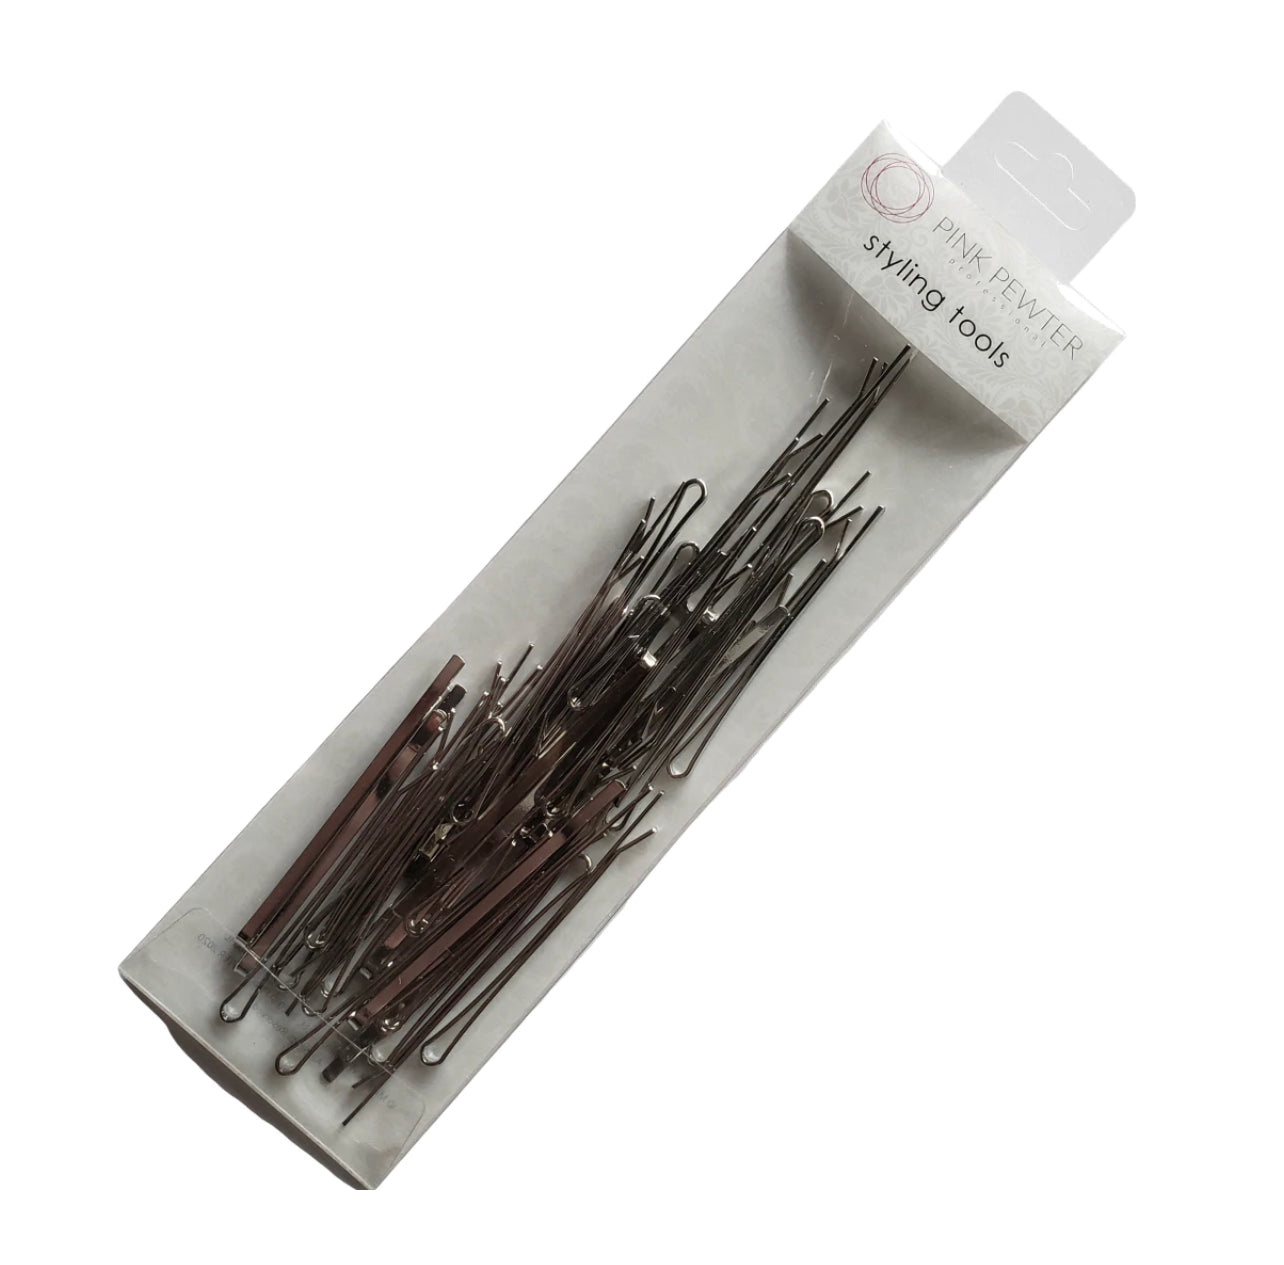 Pink Pewter Professional Flat Metal Styling Bobby Pins in Storage Case - 40pc Pack Silver